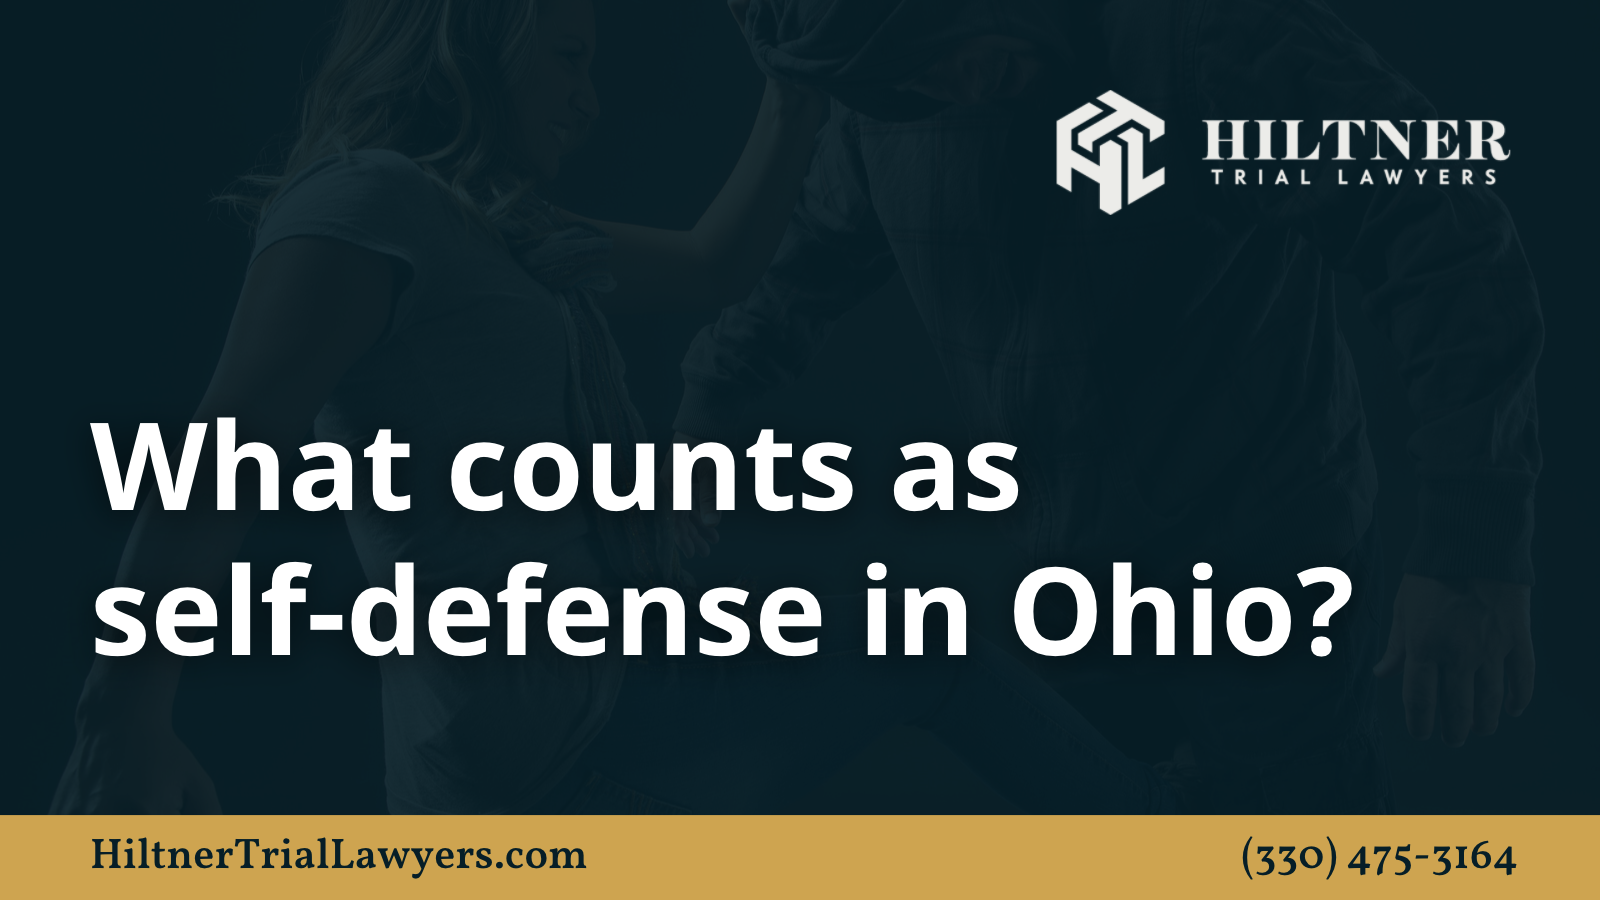 What counts as self-defense in Ohio - Hiltner Trial Lawyers Ohio - max hiltner